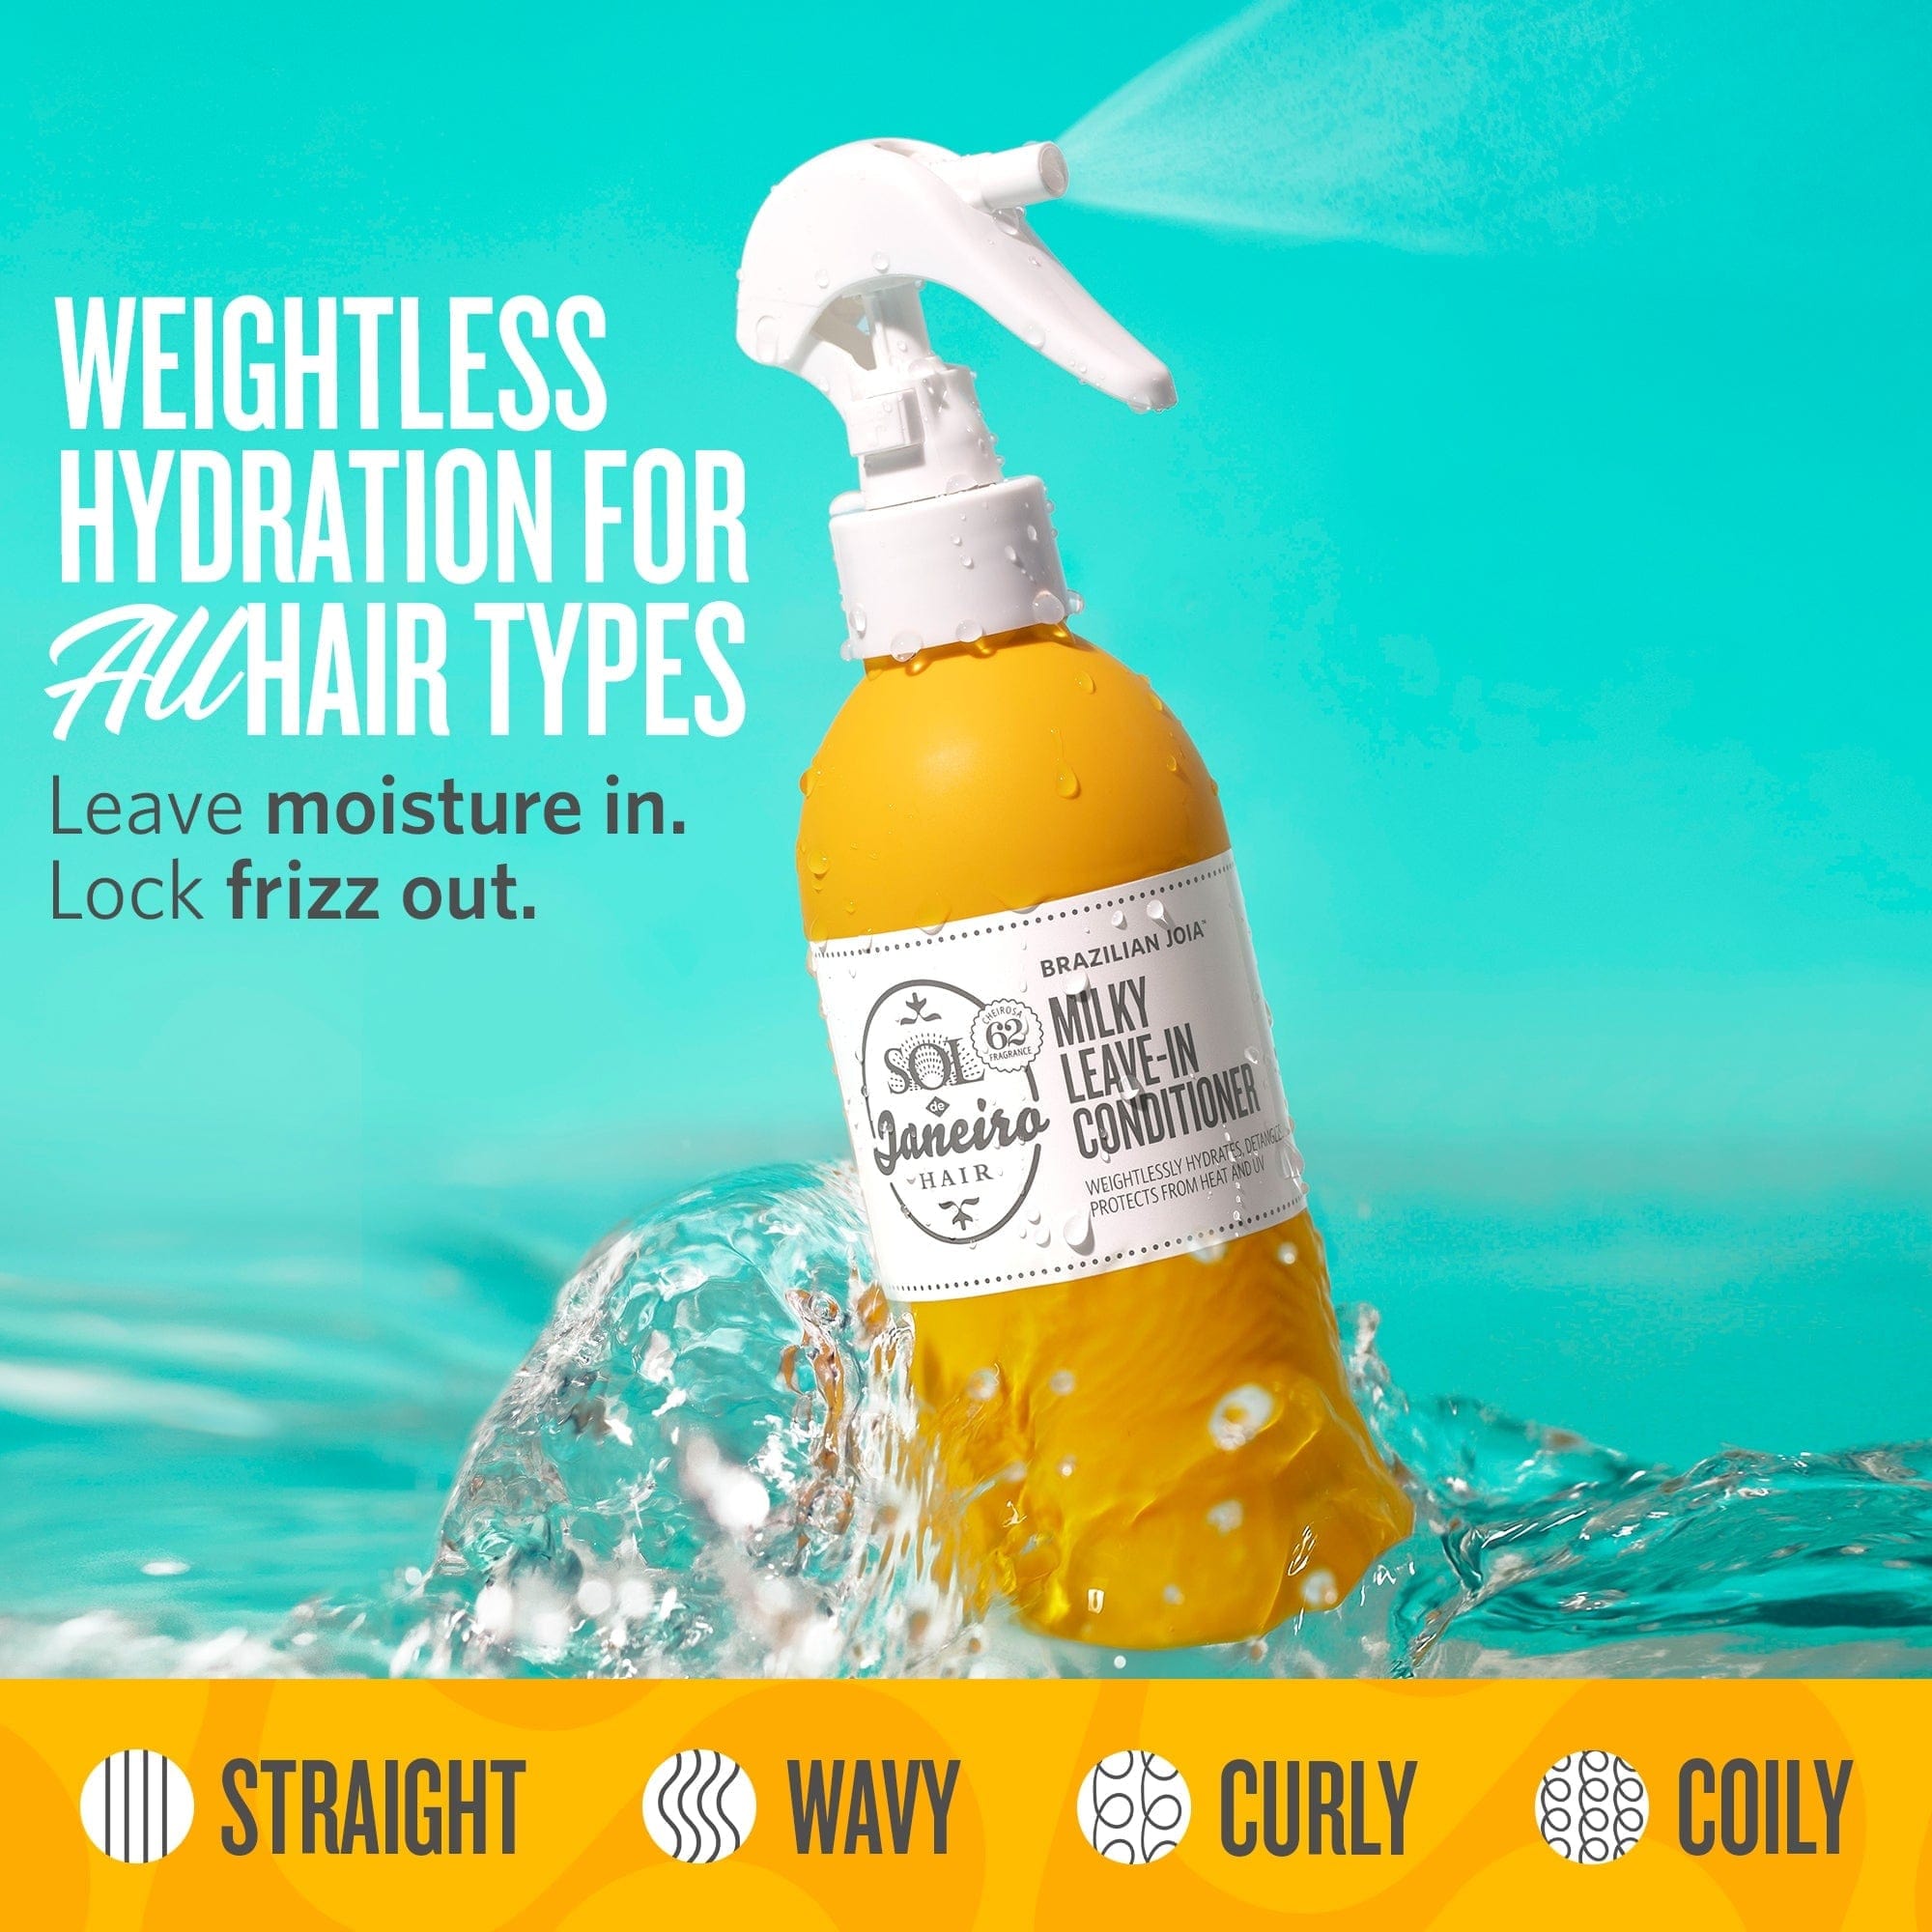 Weightless hydration for all hair types - leave moisture in. Lock frizz out.